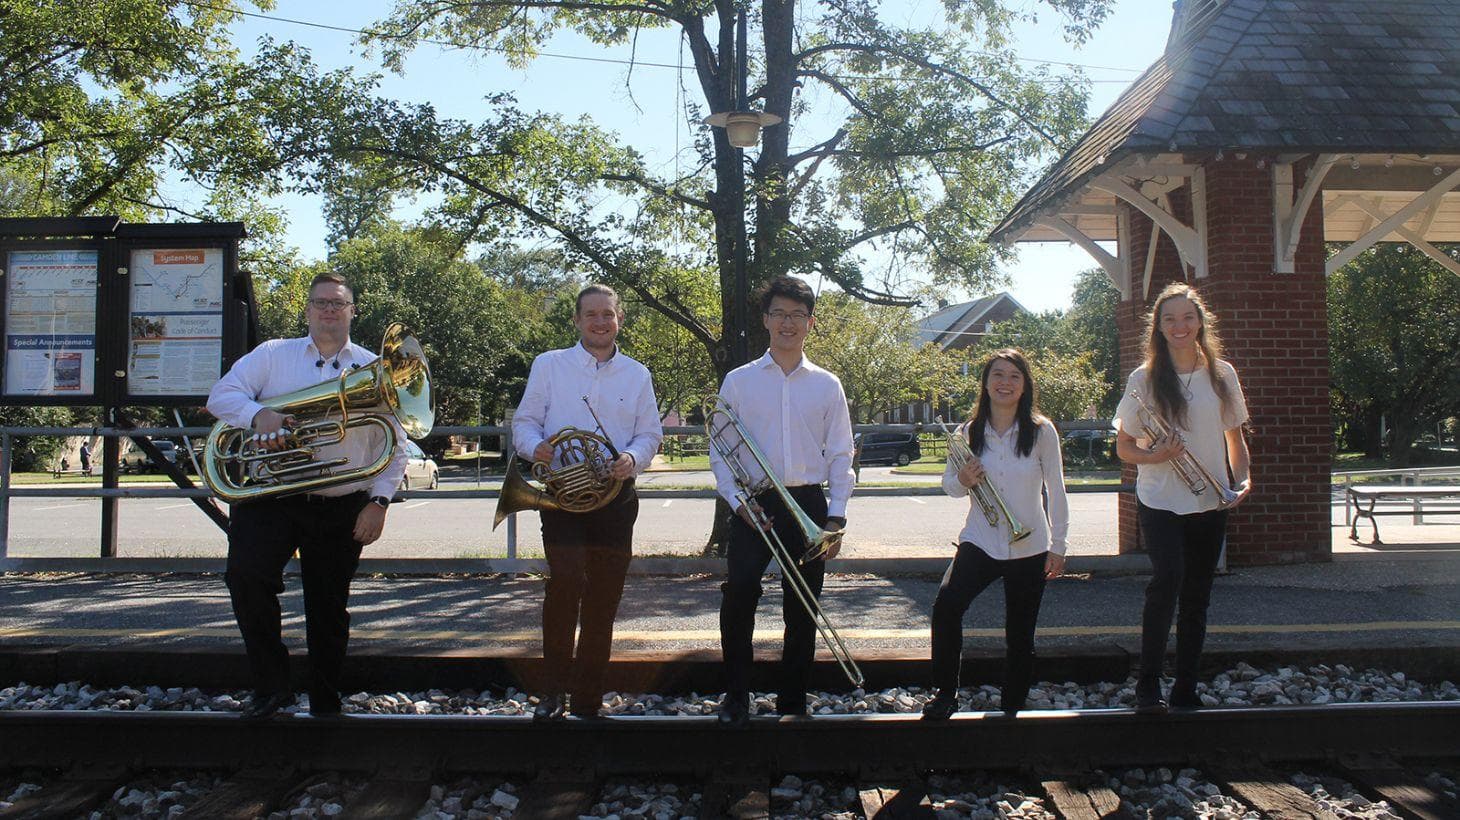 Members of the Terrapin Brass quintet pose with their instruments on train tracks.